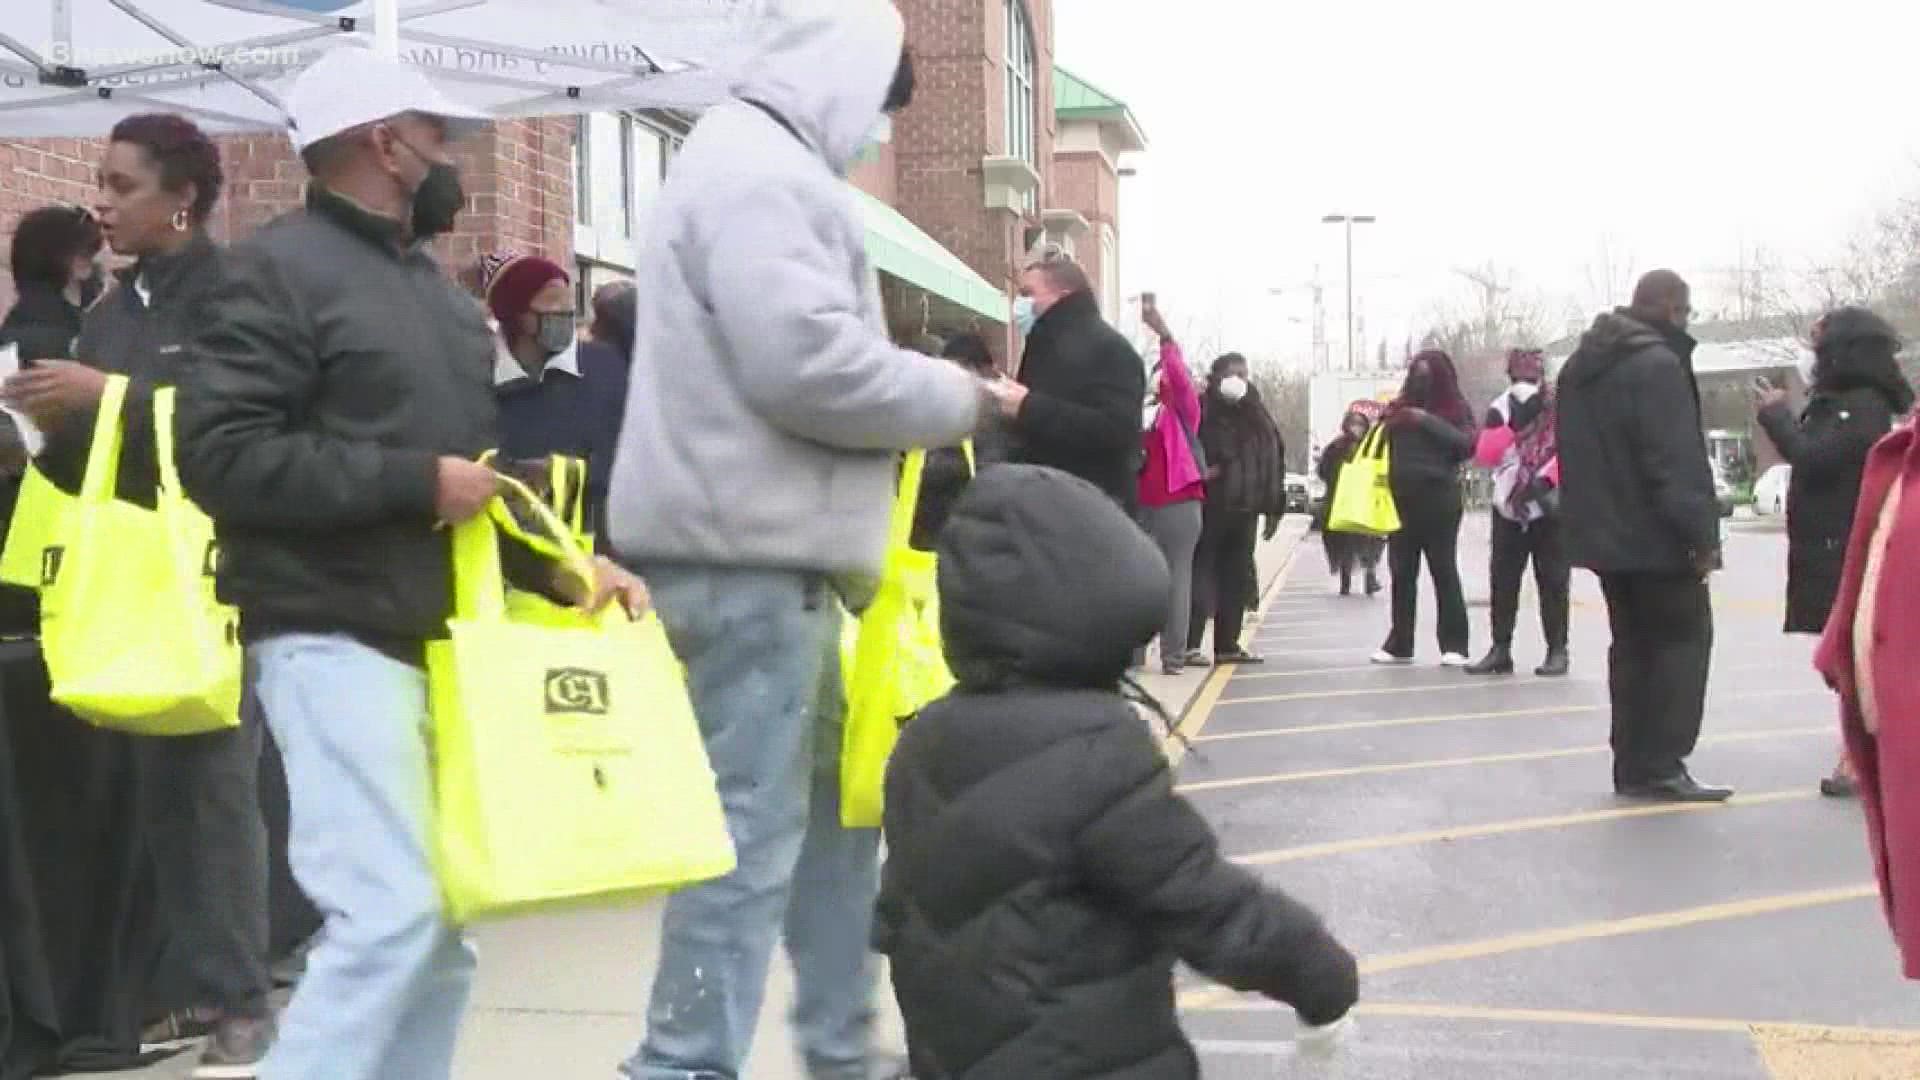 The massive giveaway was at Berkley Supermarket on Saturday morning in an area that used to be a food desert.